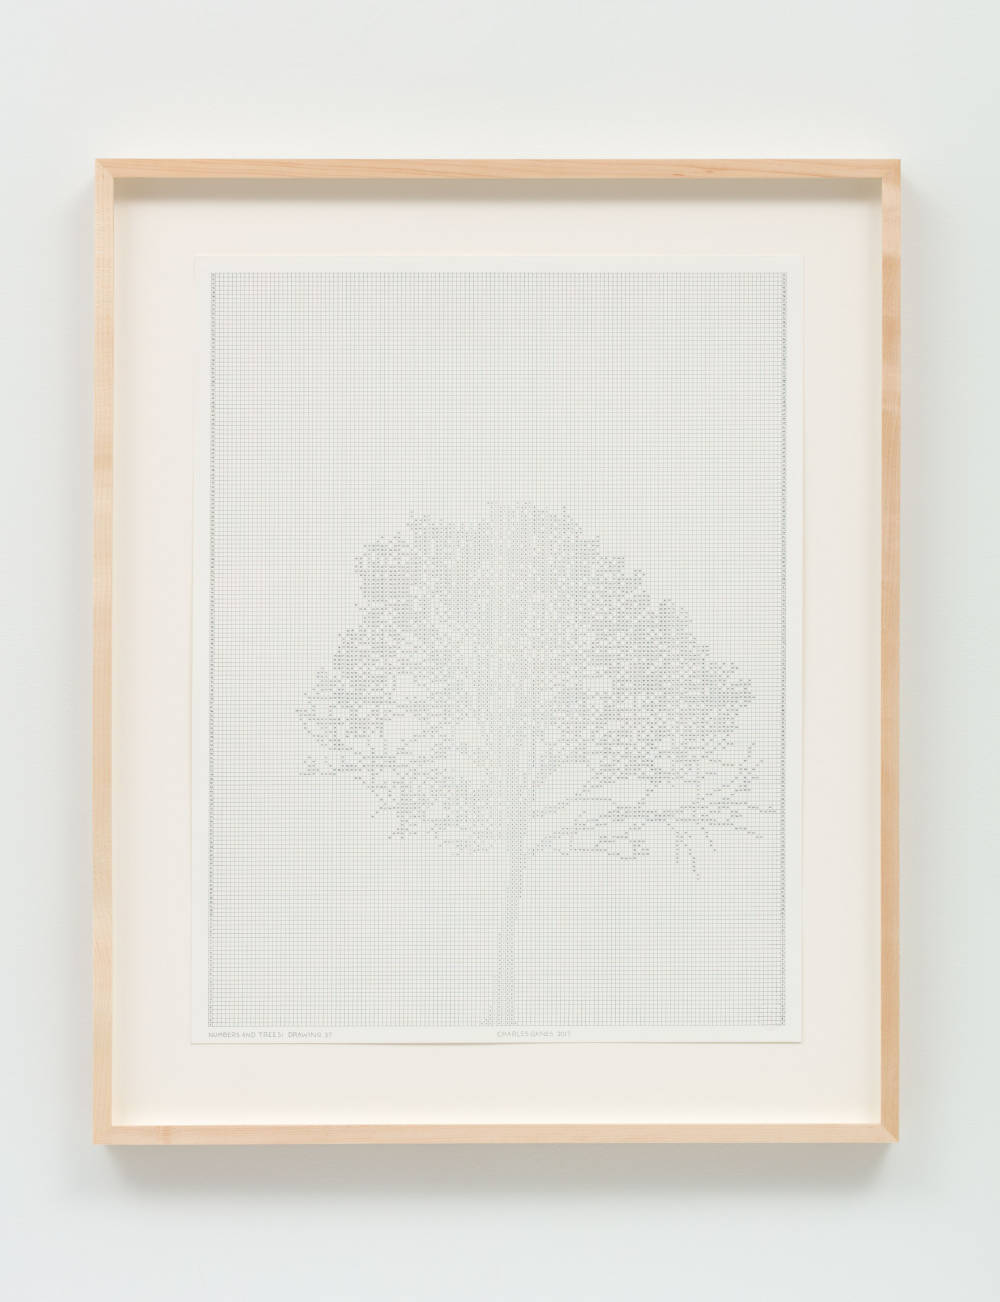 Charles Gaines, Numbers and Trees: Drawing 37, 2017